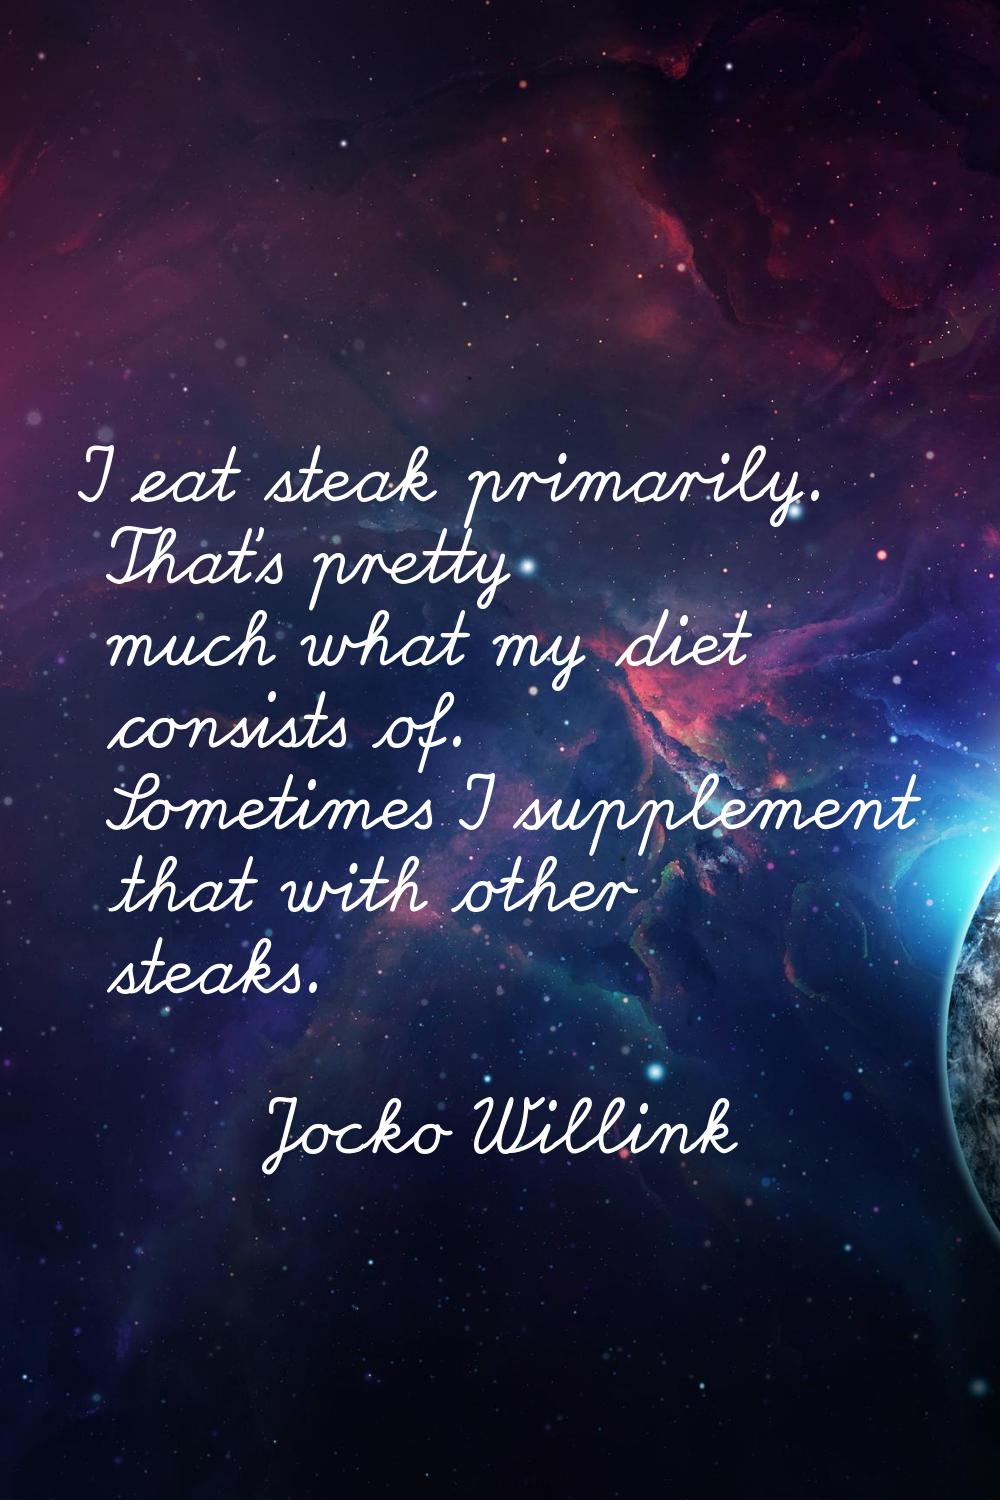 I eat steak primarily. That's pretty much what my diet consists of. Sometimes I supplement that wit